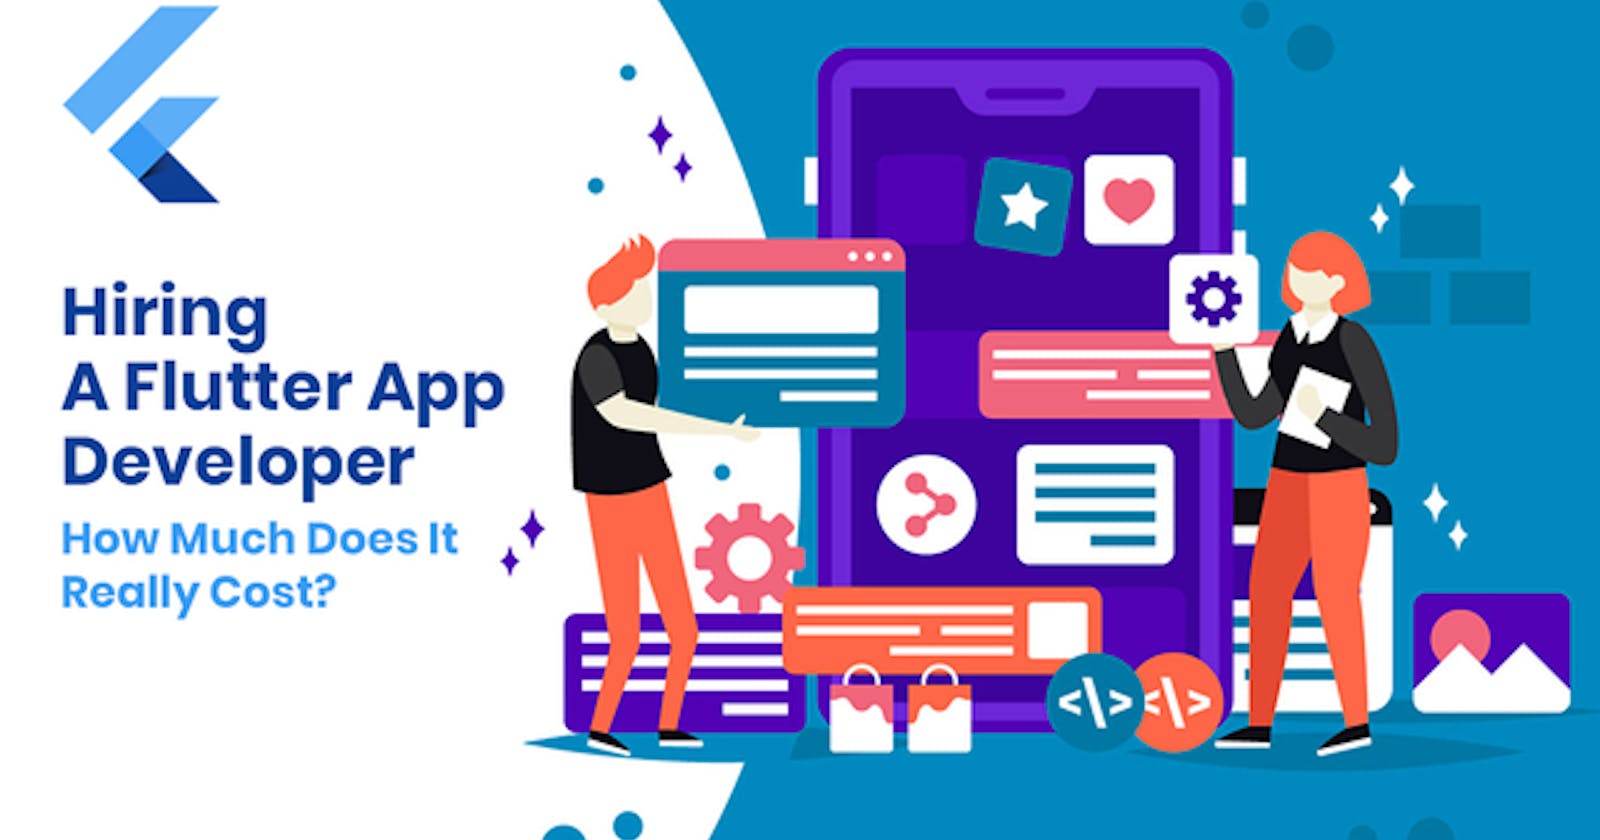 What Are The Benefits Of Flutter App Development For Business?